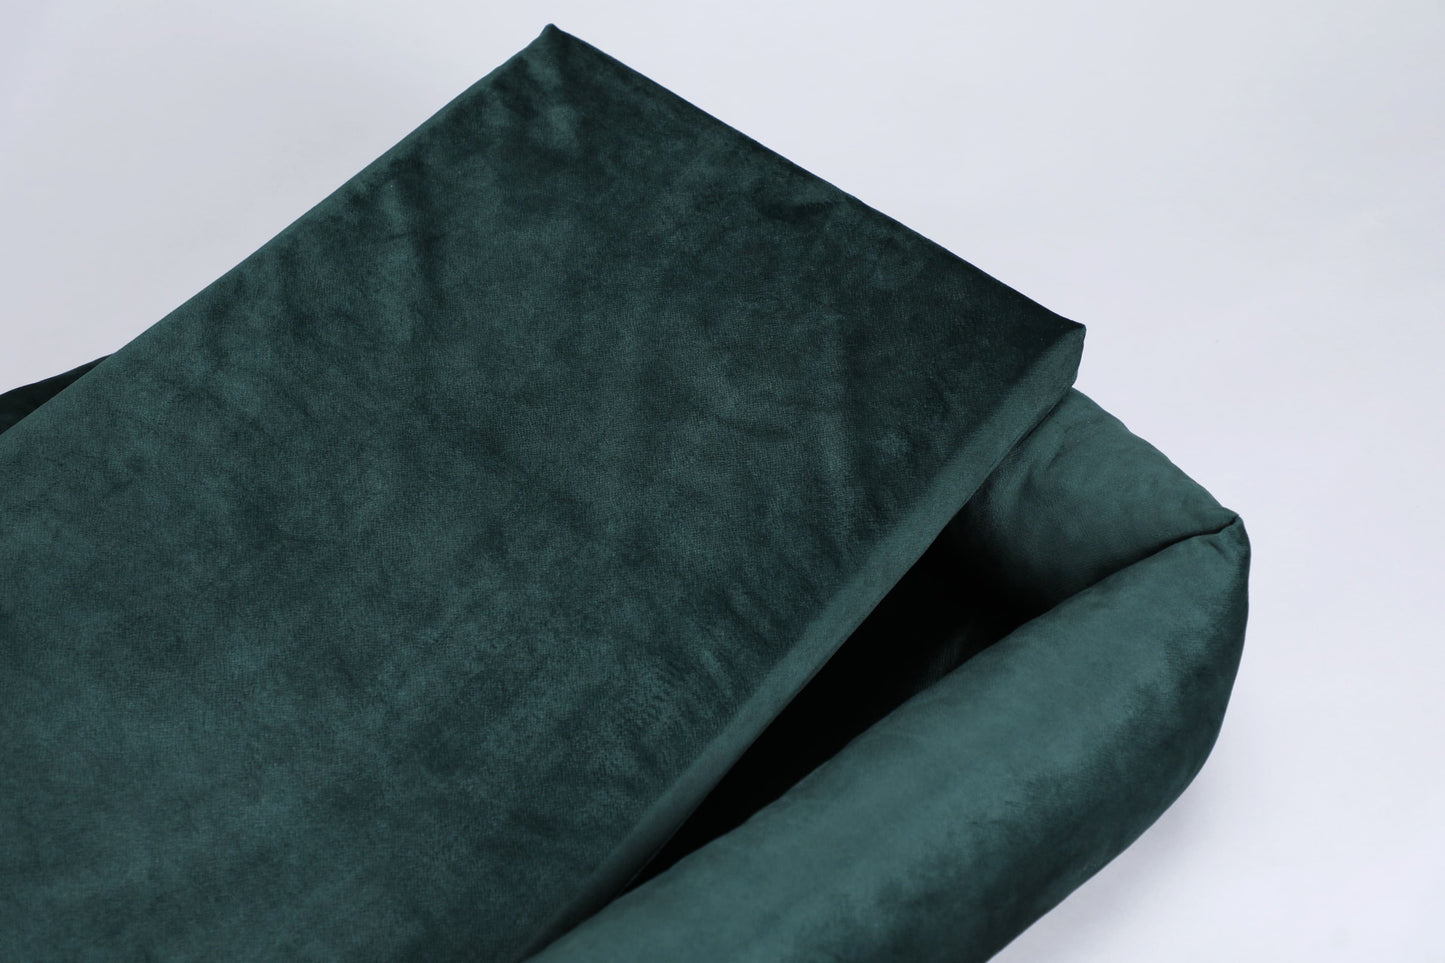 Premium dog bed with sides | 2-sided | EMERALD GREEN - premium dog goods handmade in Europe by My Wild Other